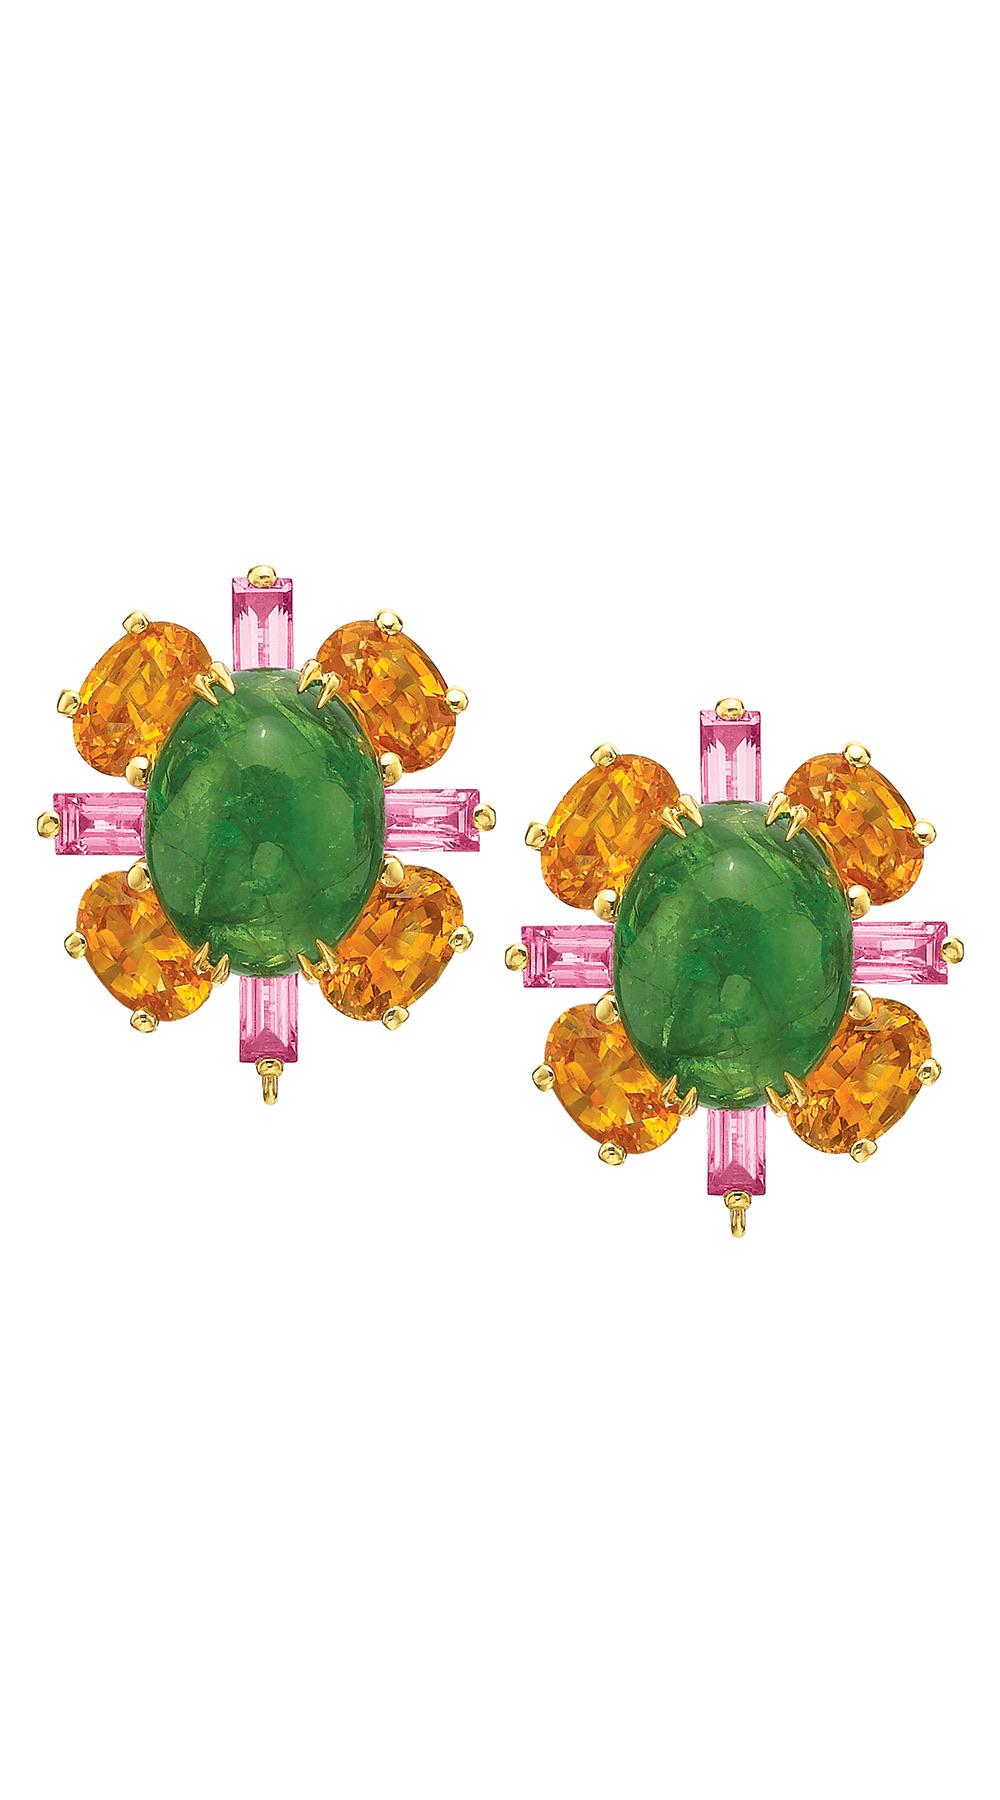 Andrew Glassford's Convertible Earrings made with 23.95 carats of Cabochon Tsavorite Green Garnets. They are surrounded by 7.45 carats of Oval Orange Sapphires. 3.74 carats of Pink Sapphires in Baguette and round shapes all set in 18k Yellow Gold.